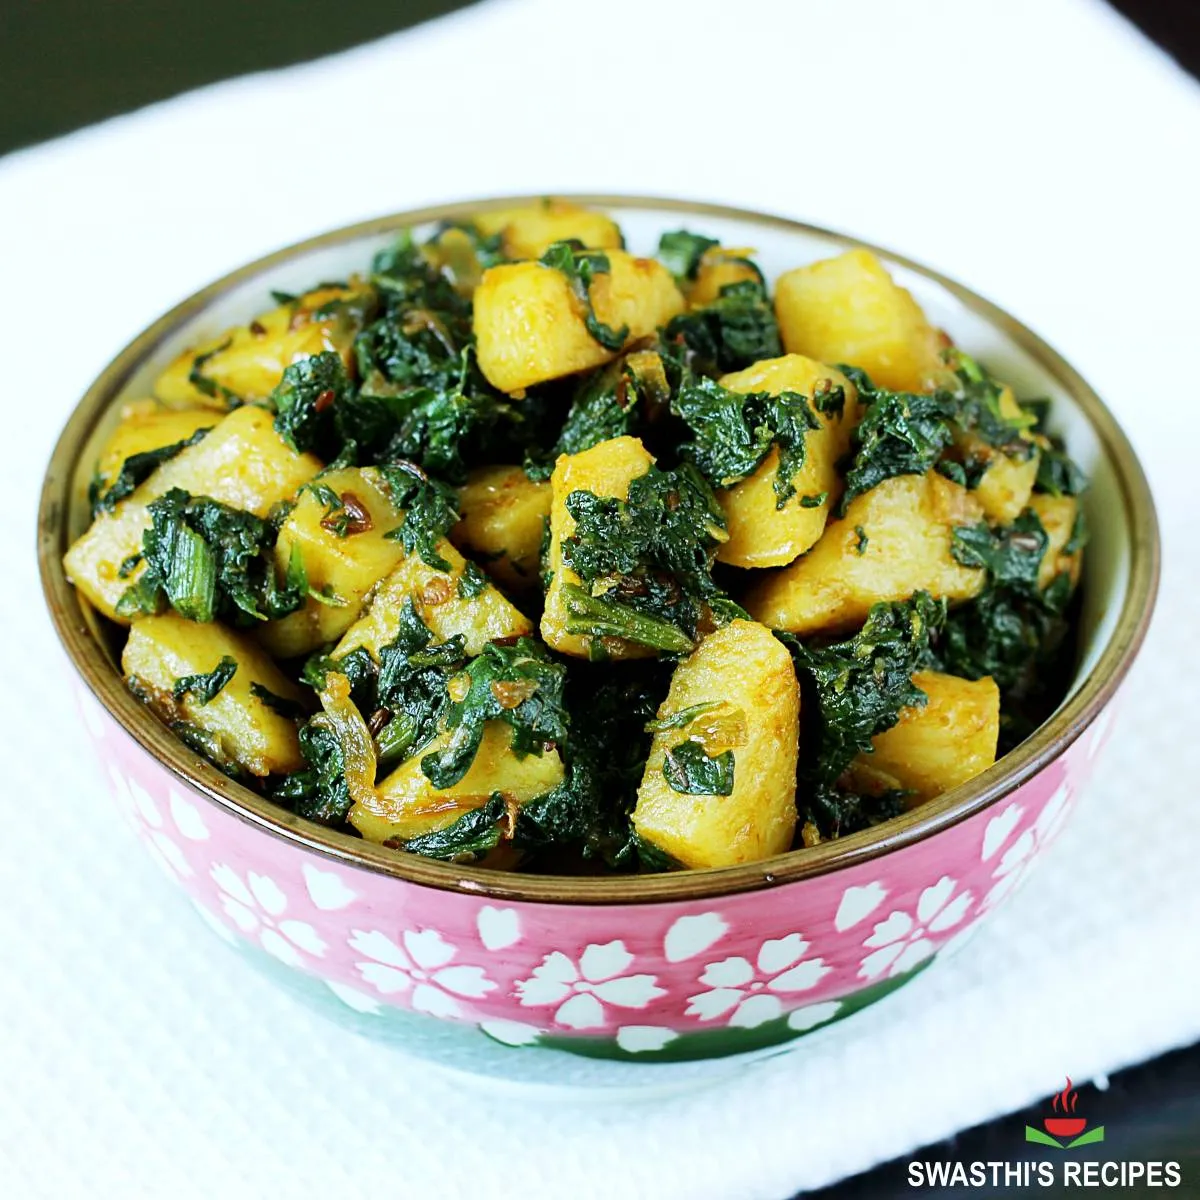 Aloo palak is spinach potatoes made in Indian style